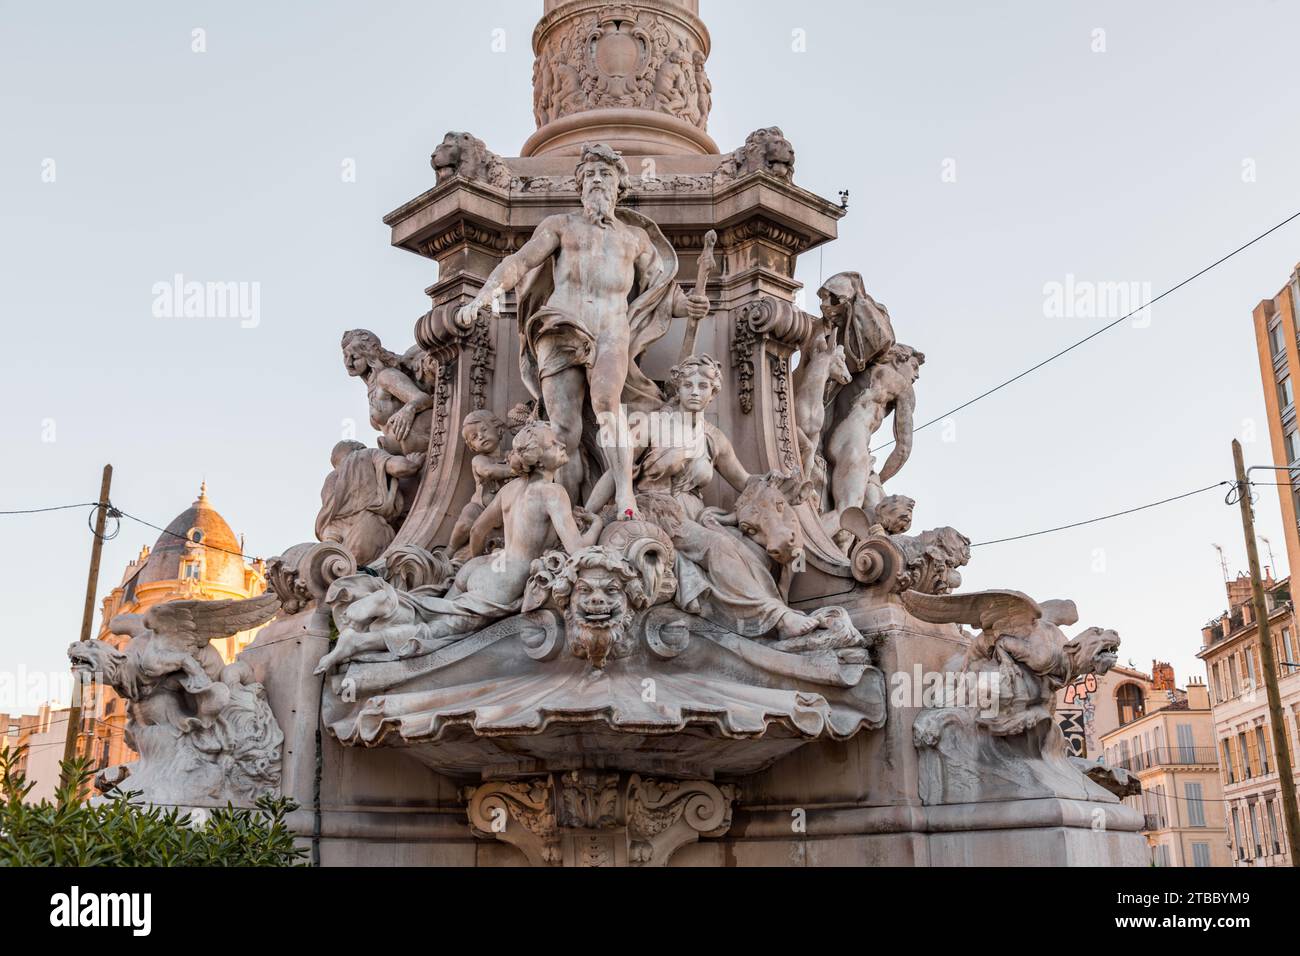 Marseille, France - January 28, 2022: The Place Castellane is a historic square in the 6th arrondissement of Marseille, Bouches-du-Rhone, France. It w Stock Photo